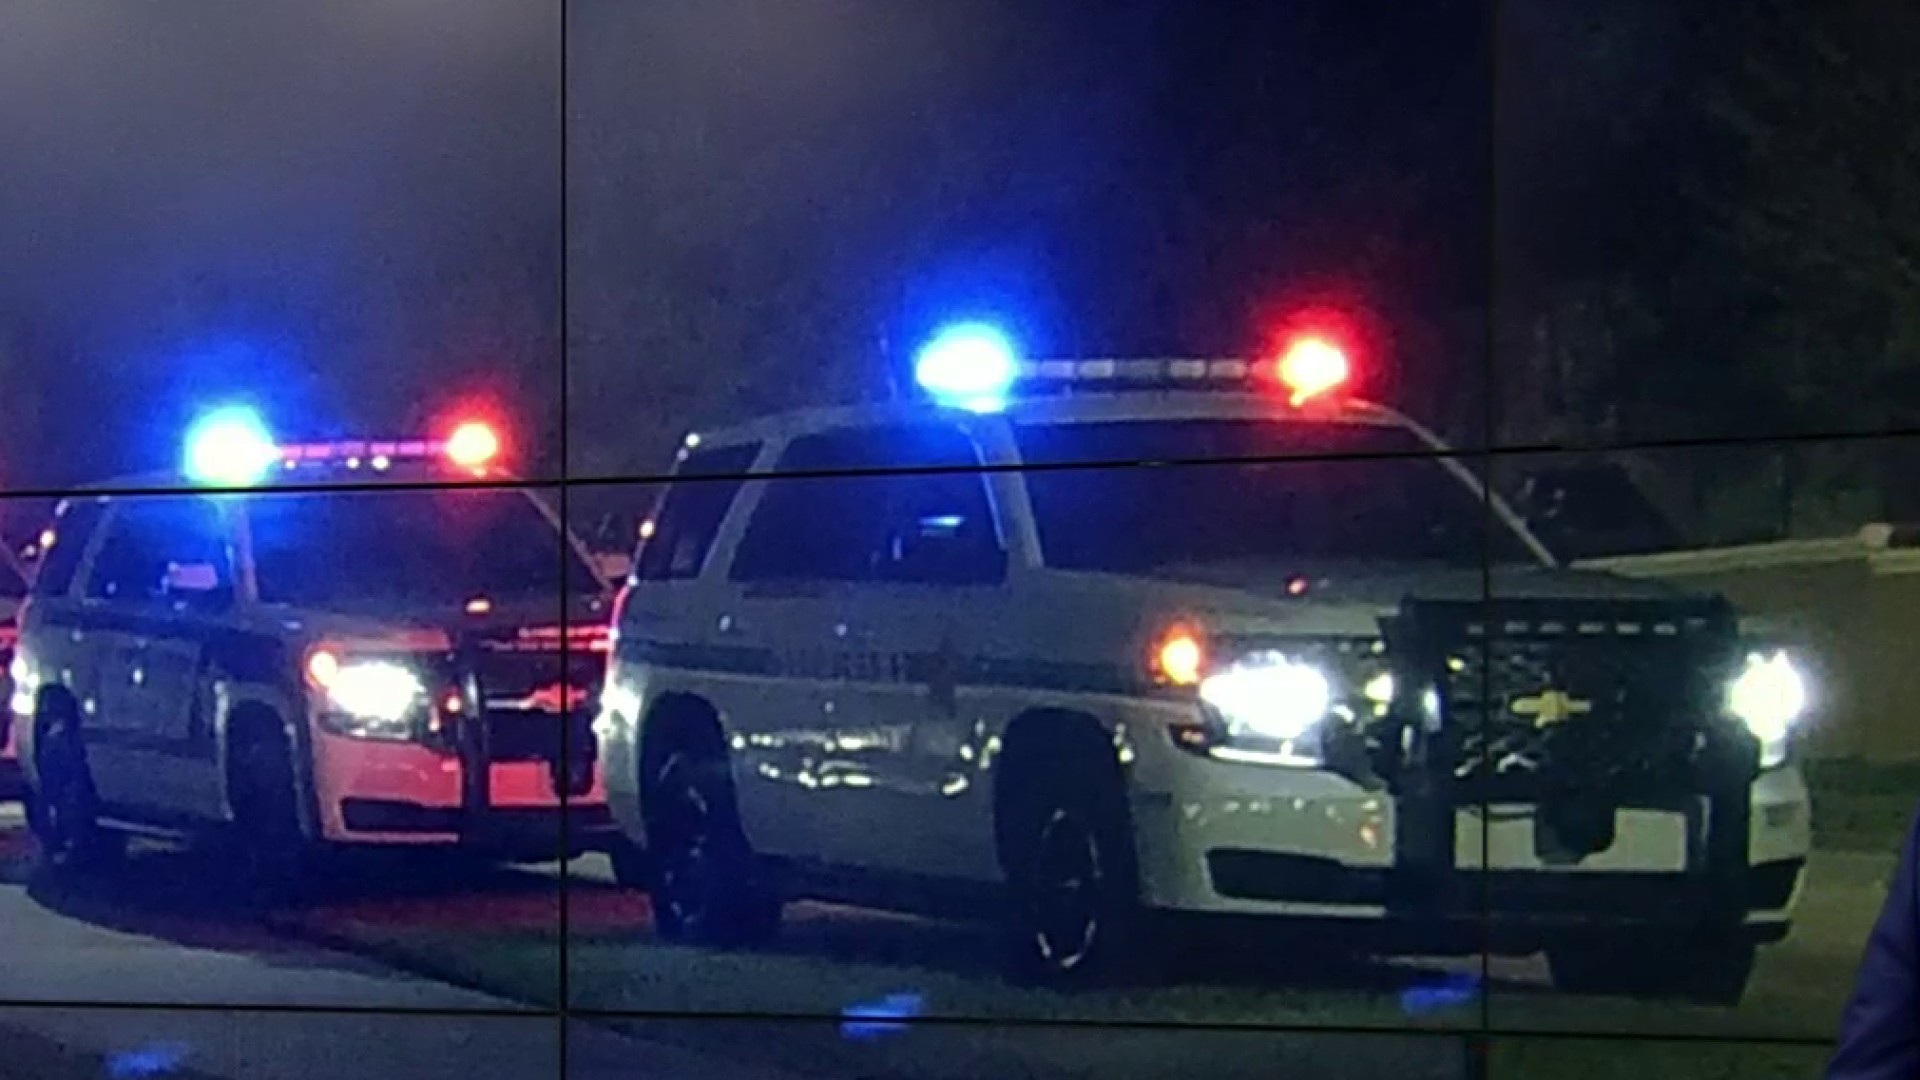 Model Police Cars With Working Lights - www.inf-inet.com